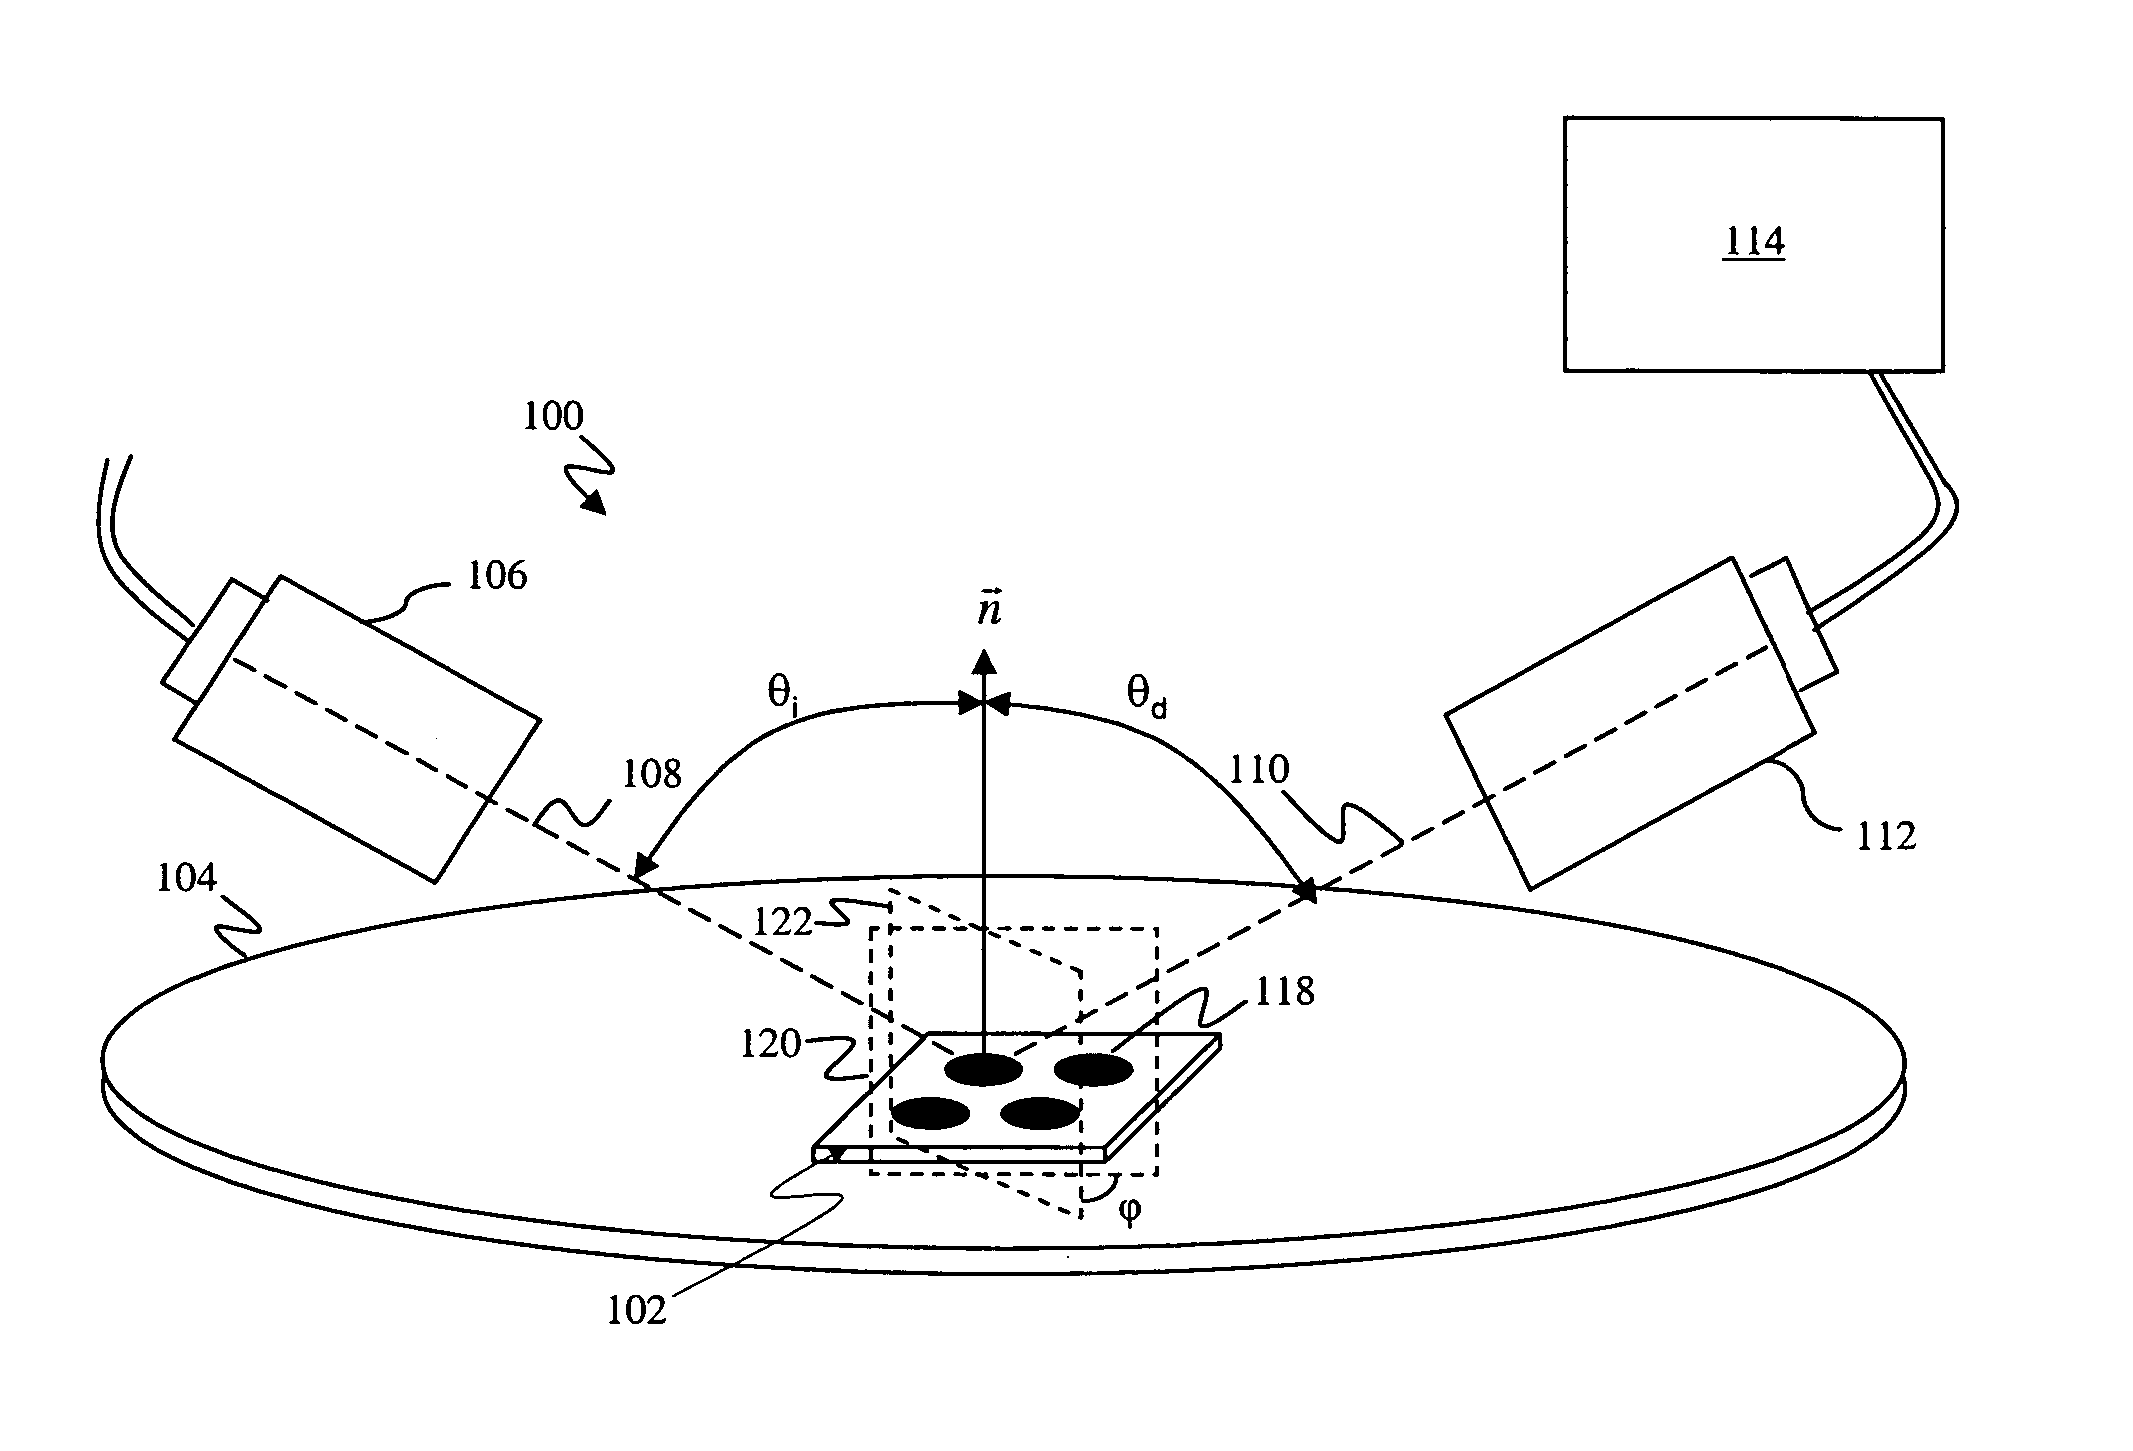 Azimuthal scanning of a structure formed on a semiconductor wafer